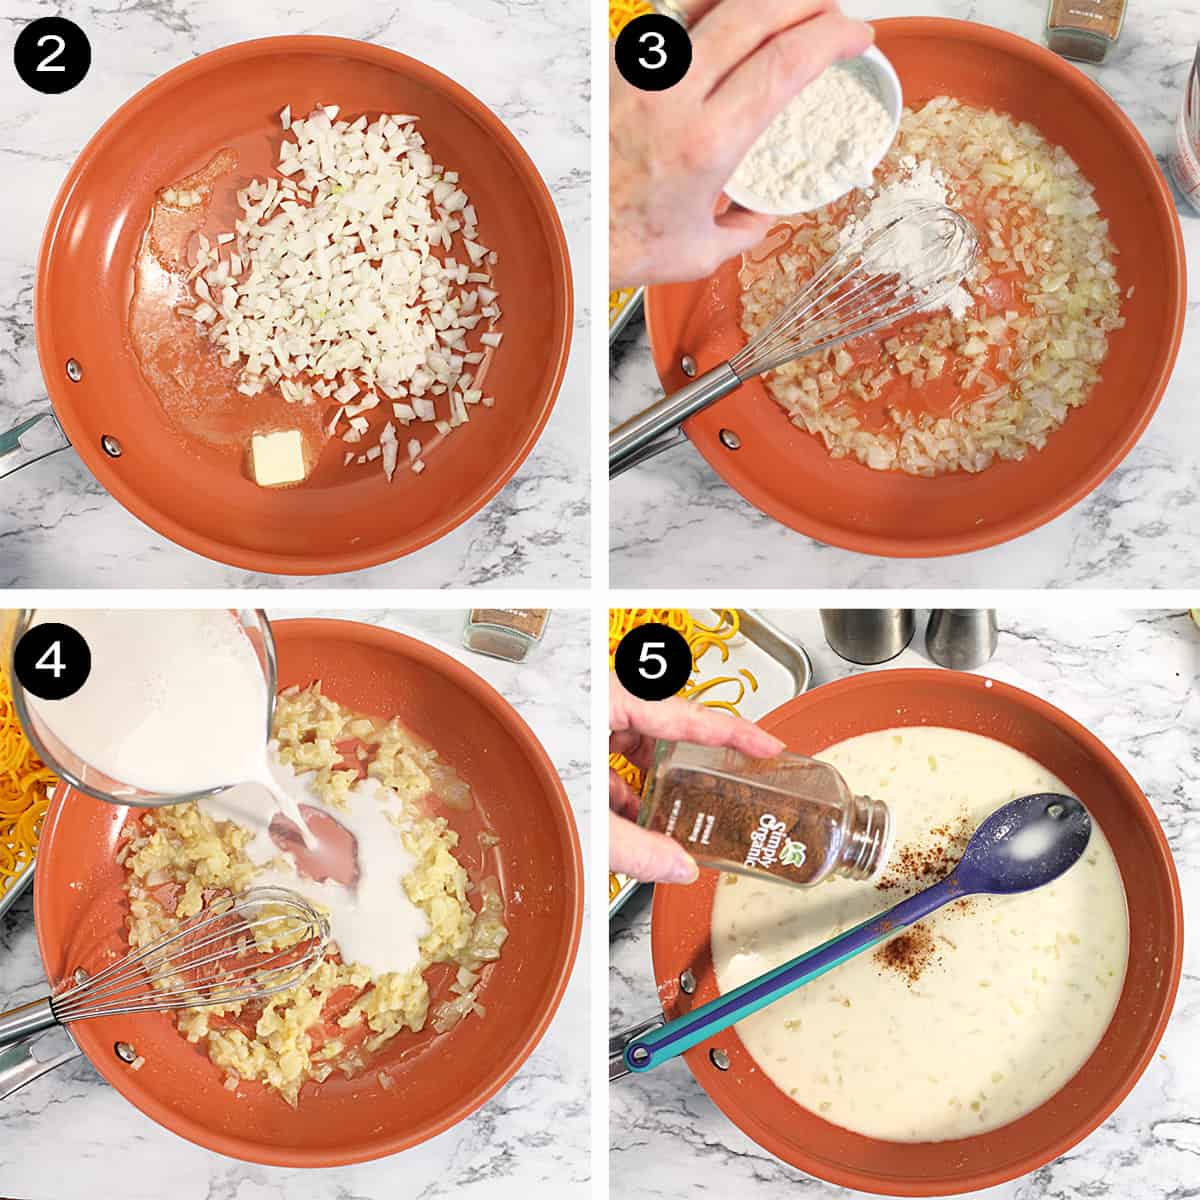 Collage of steps 2-5 to make sauce.